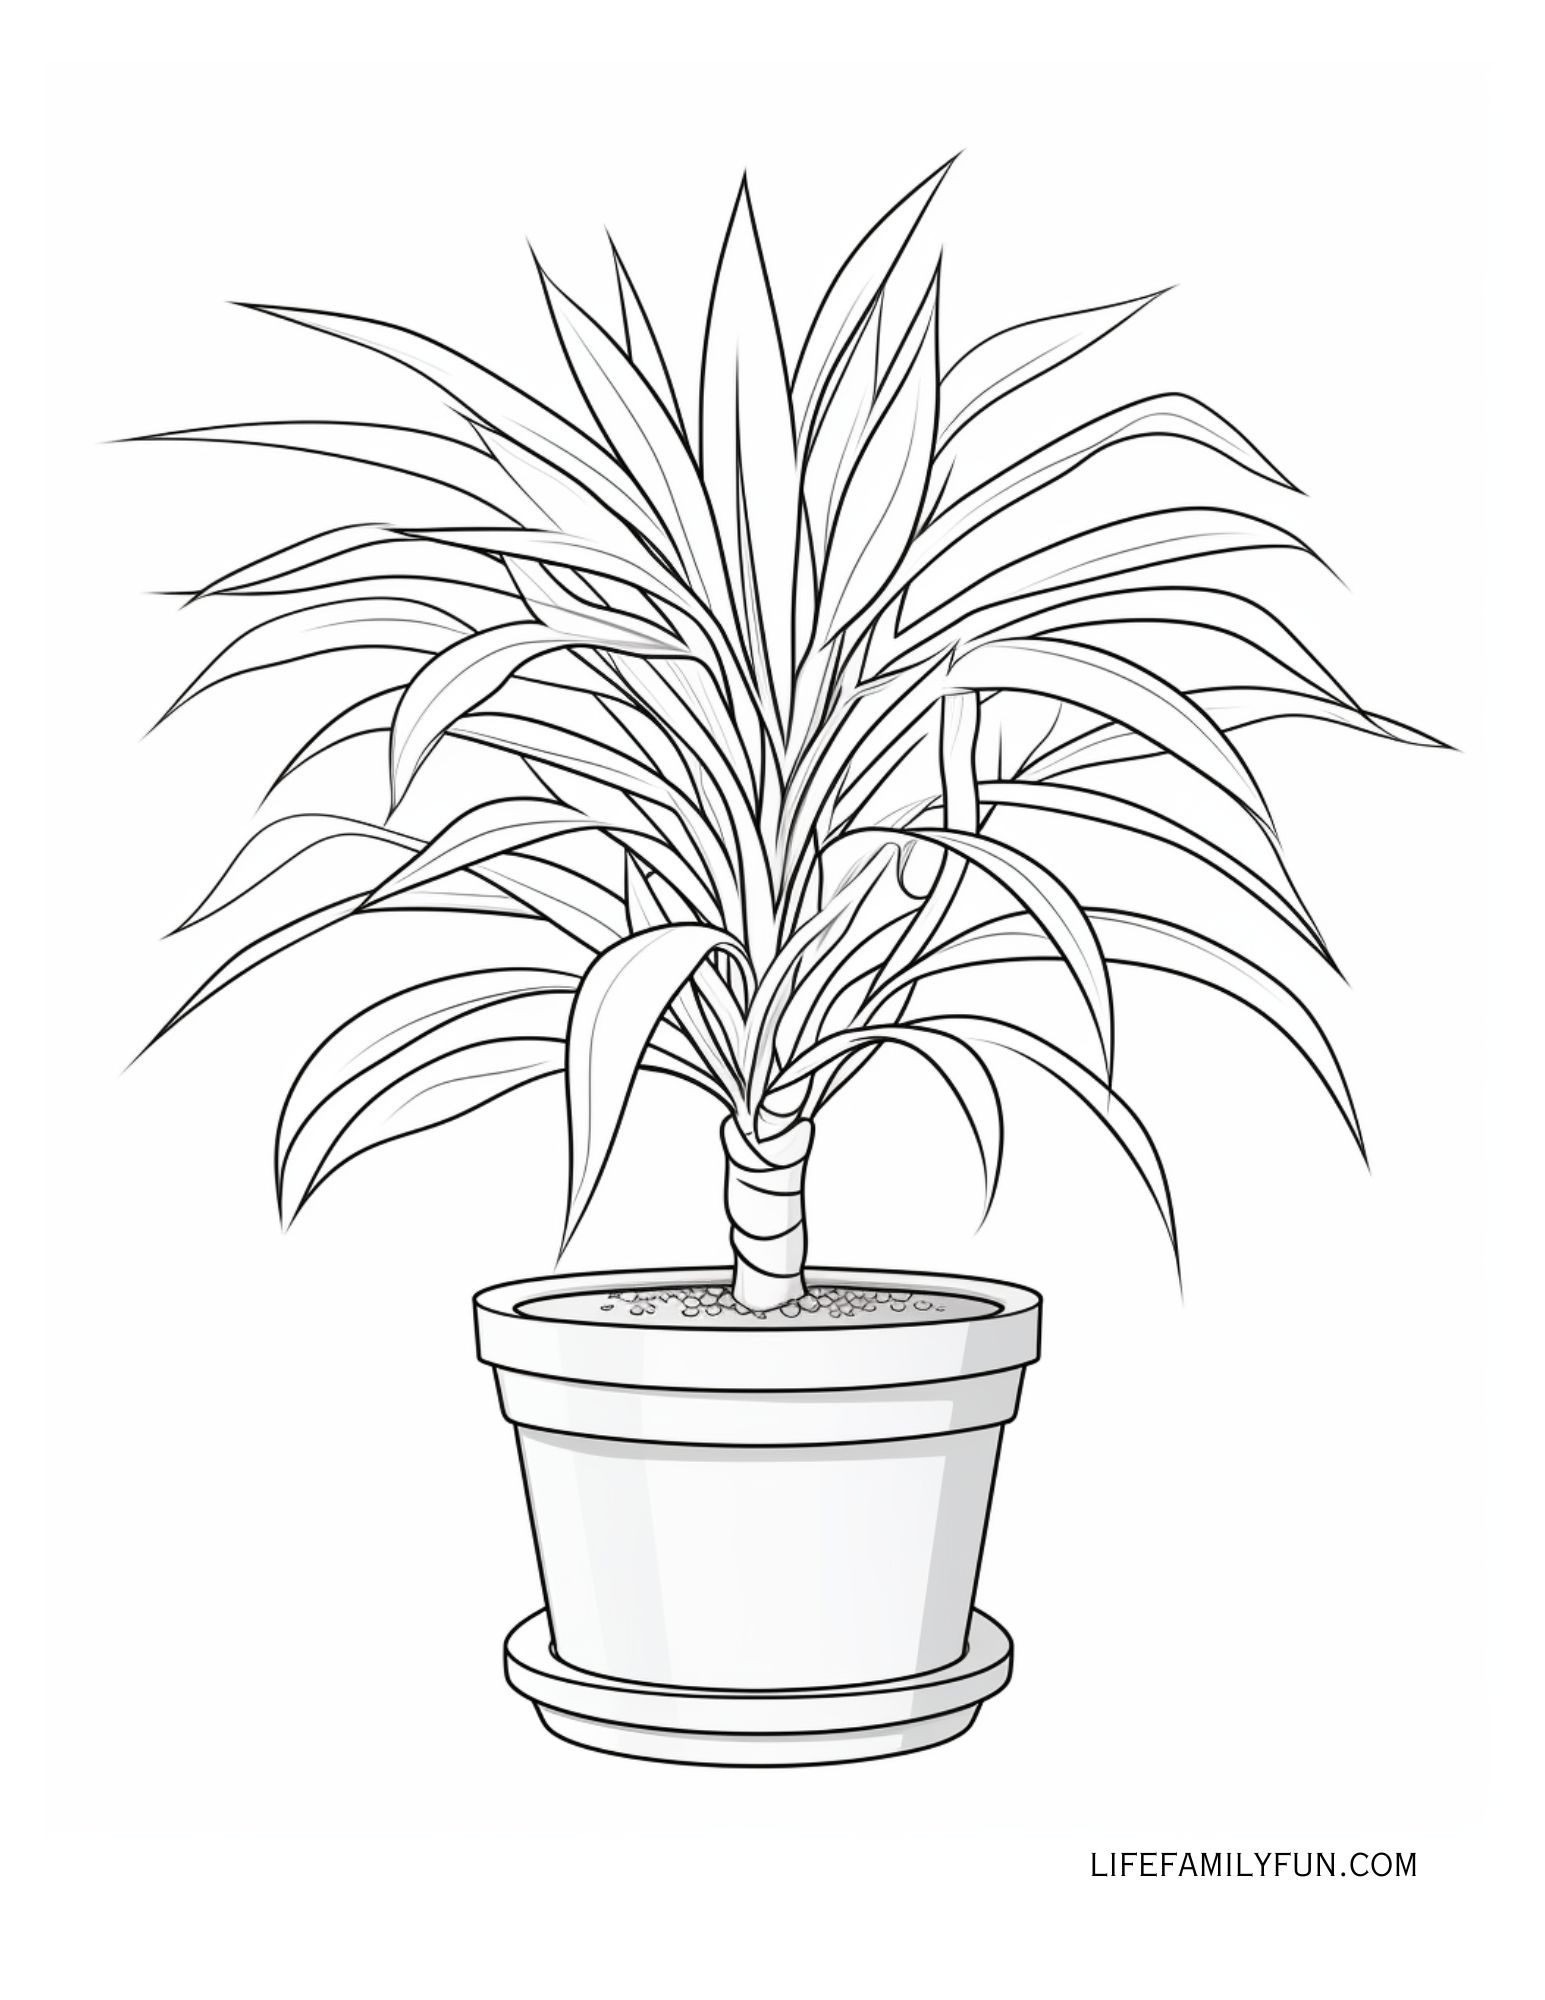 Spider Plant Coloring Page